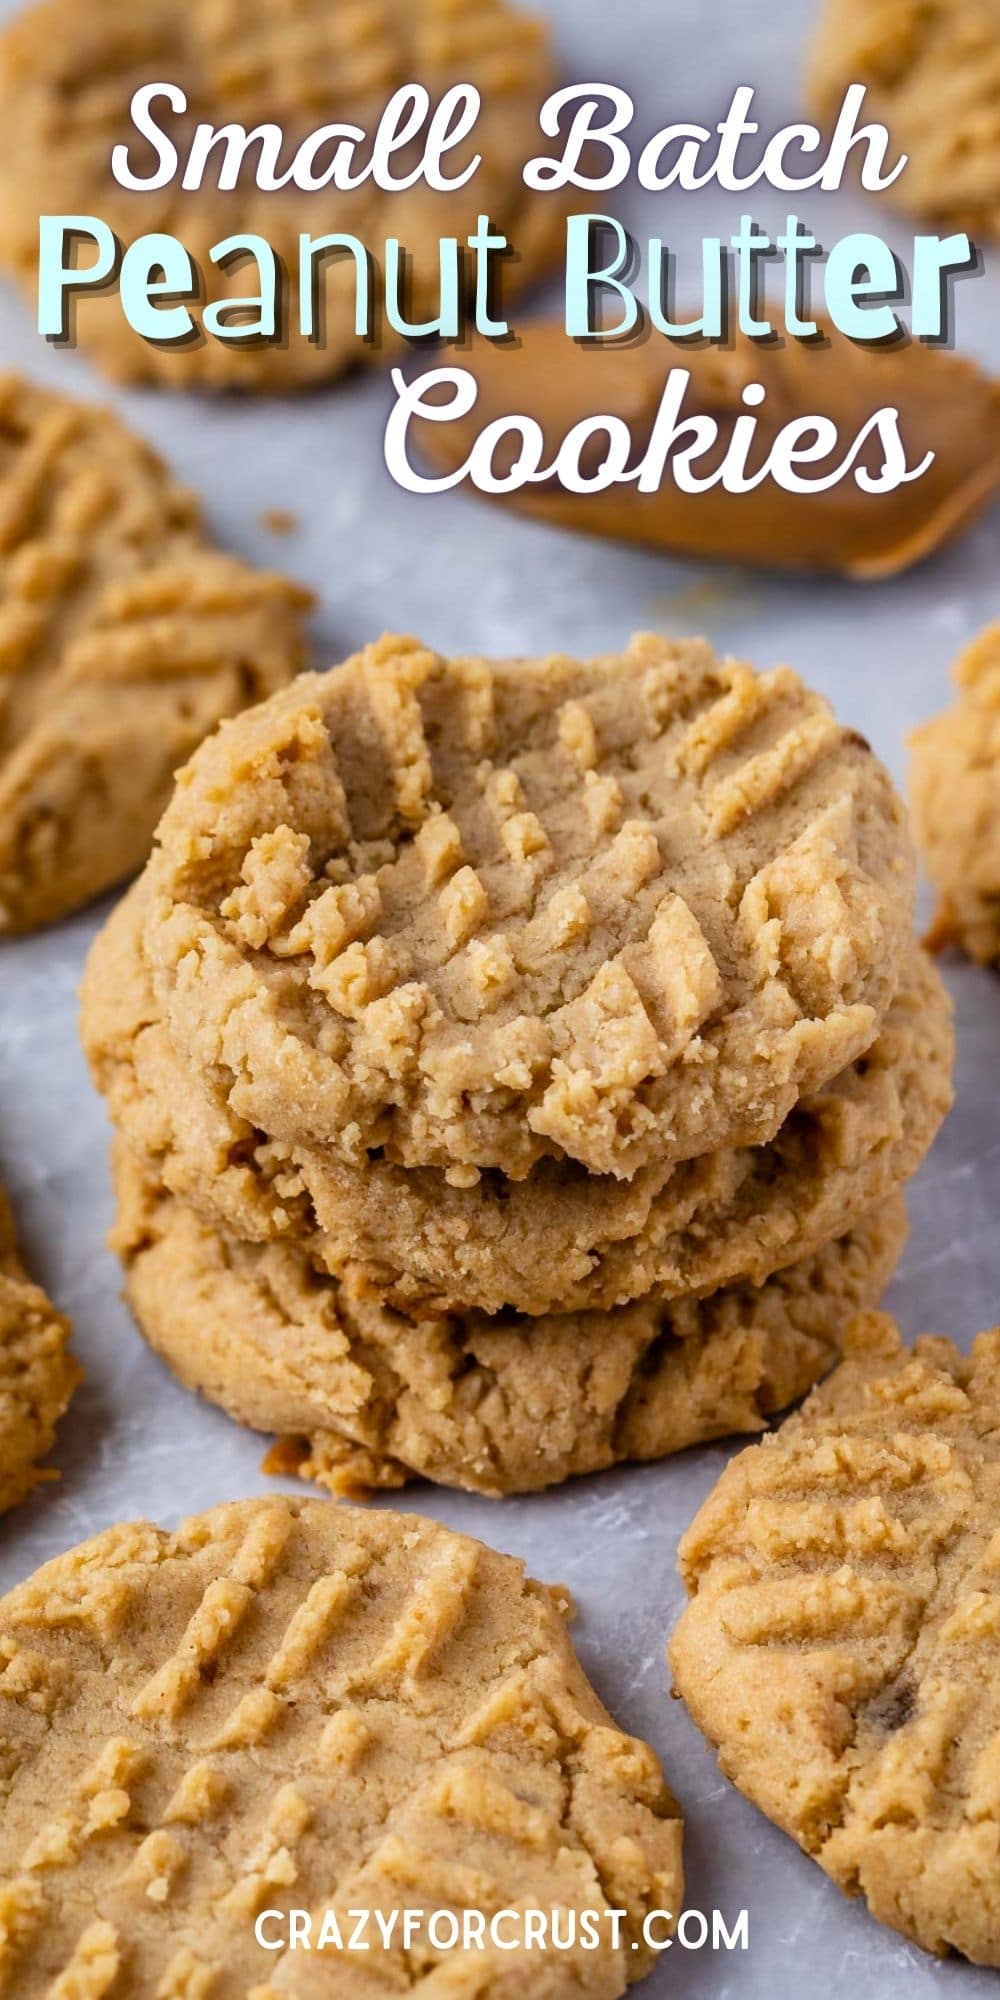 Peanut butter cookies on parchment paper with recipe title on top of image